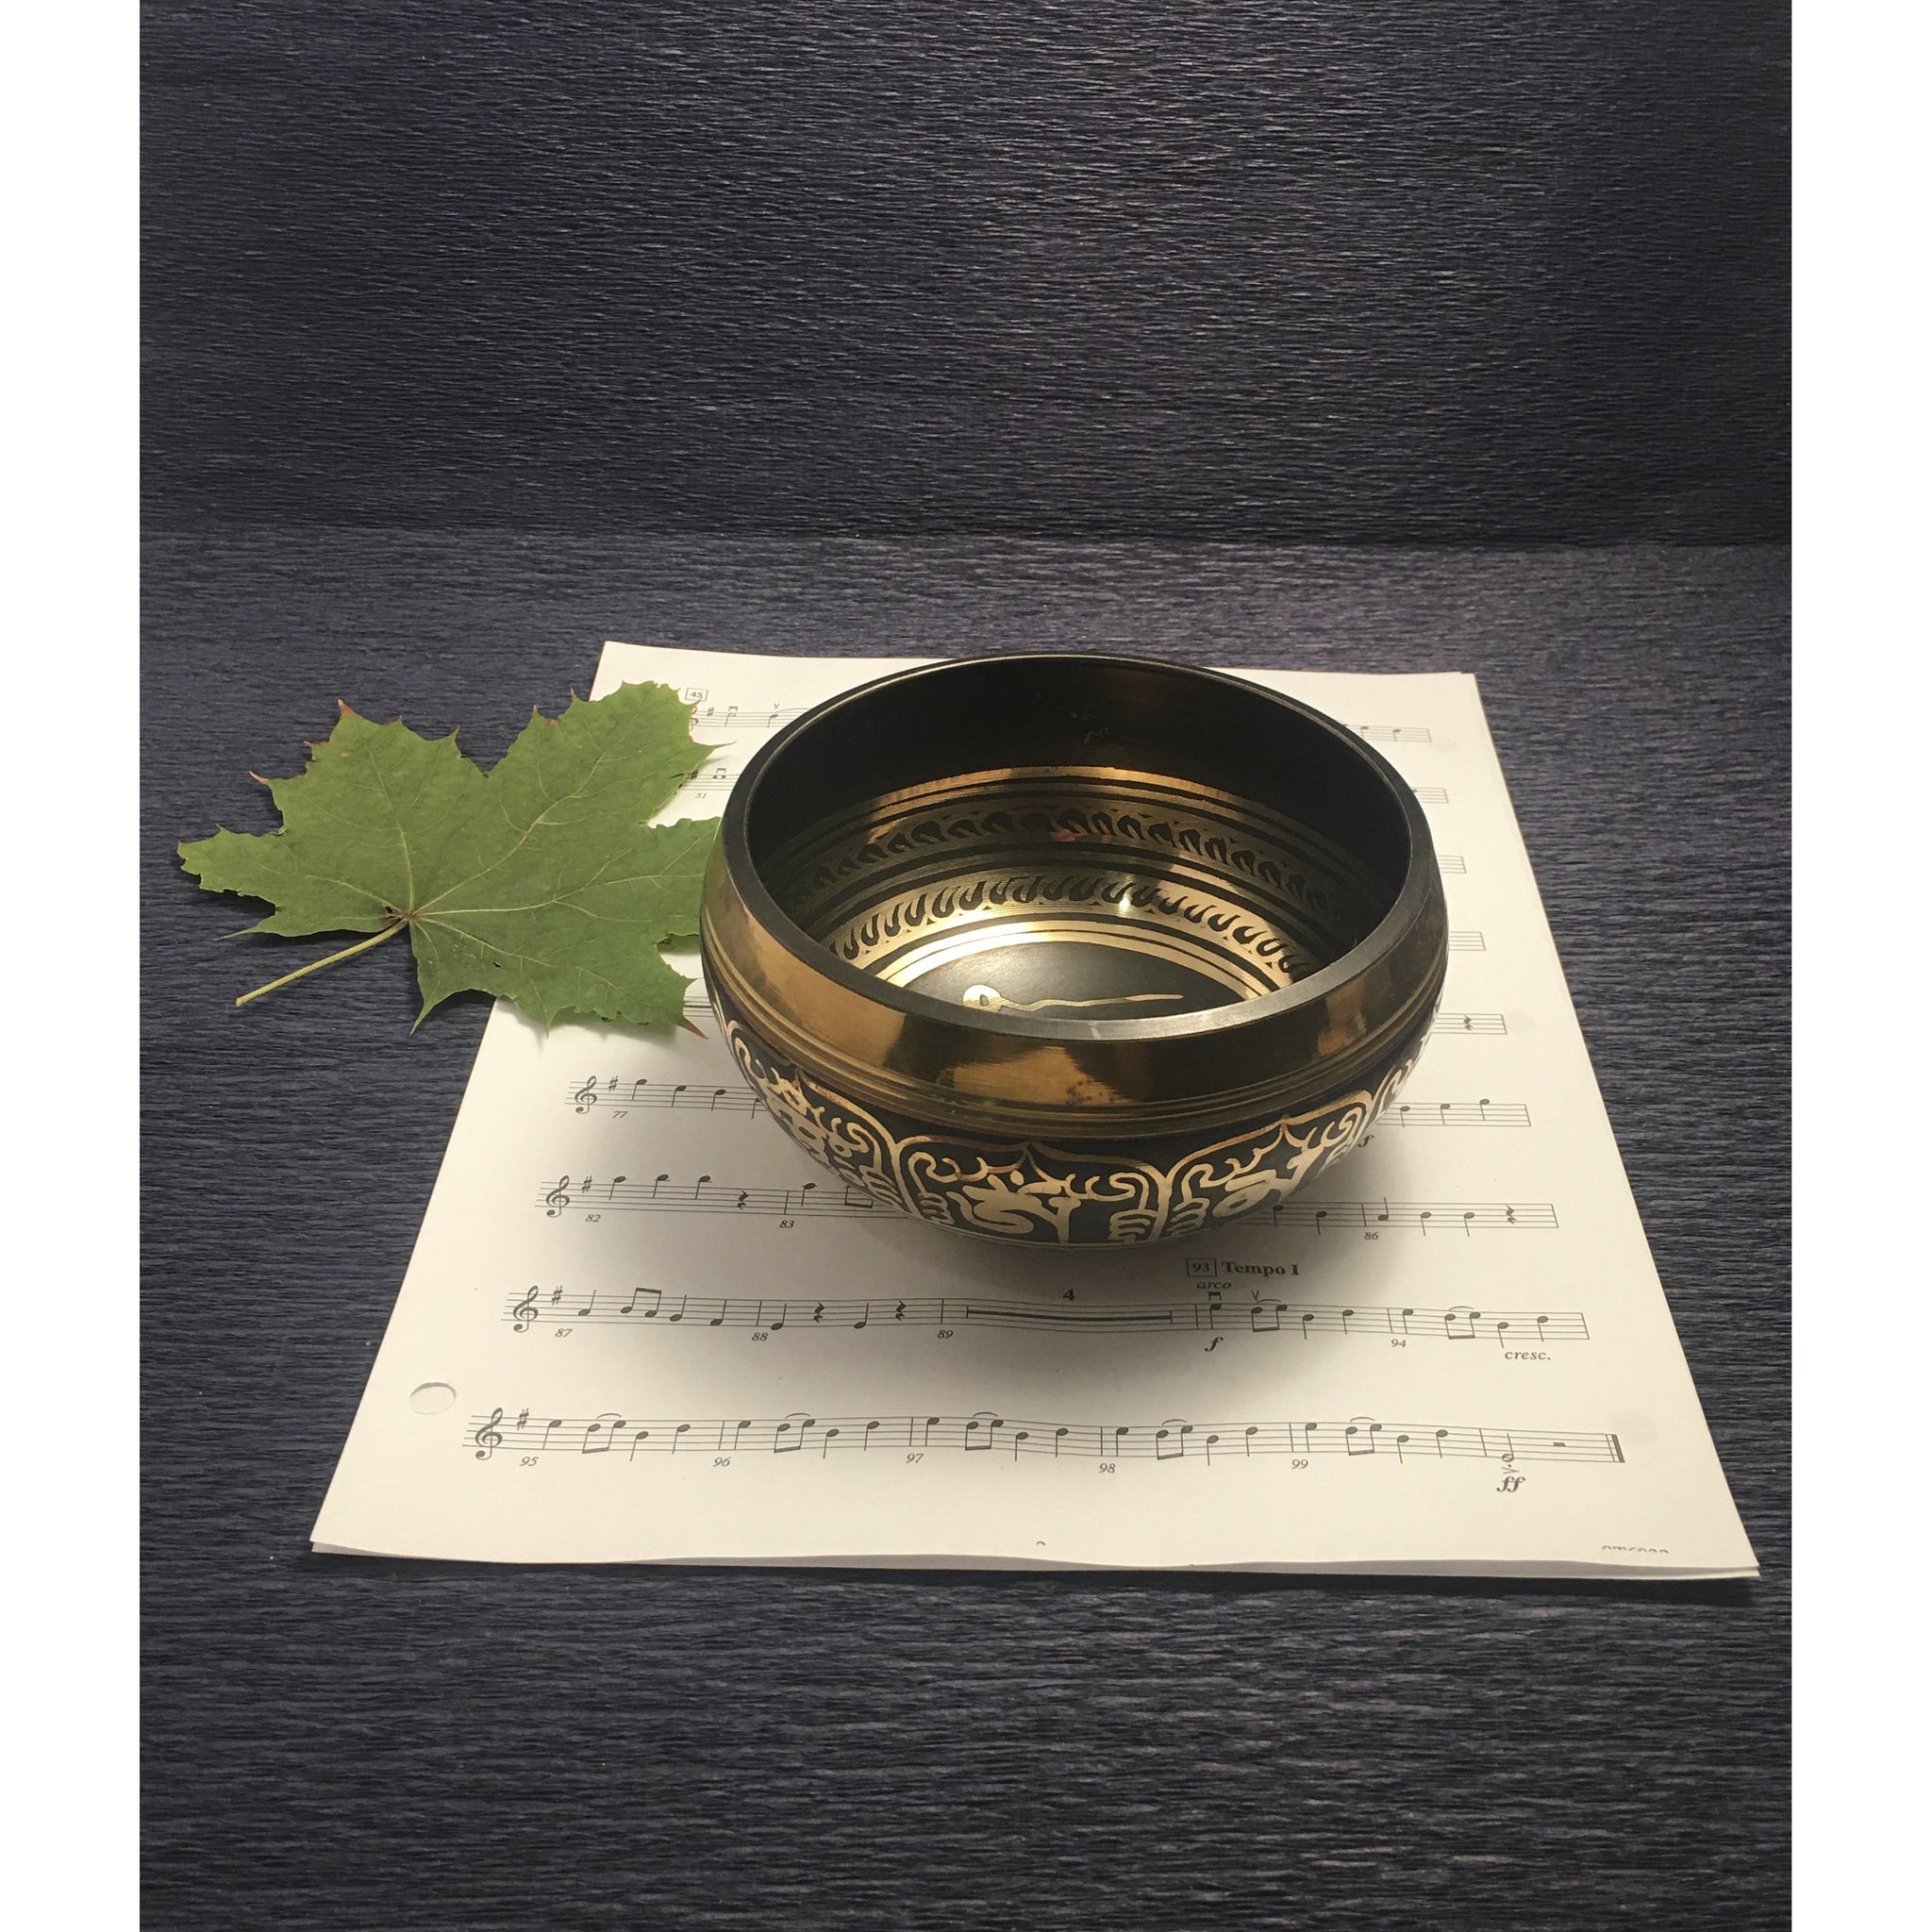 Tibetan singing bowl: Price and tone are vary base on the singing bowl's weight.